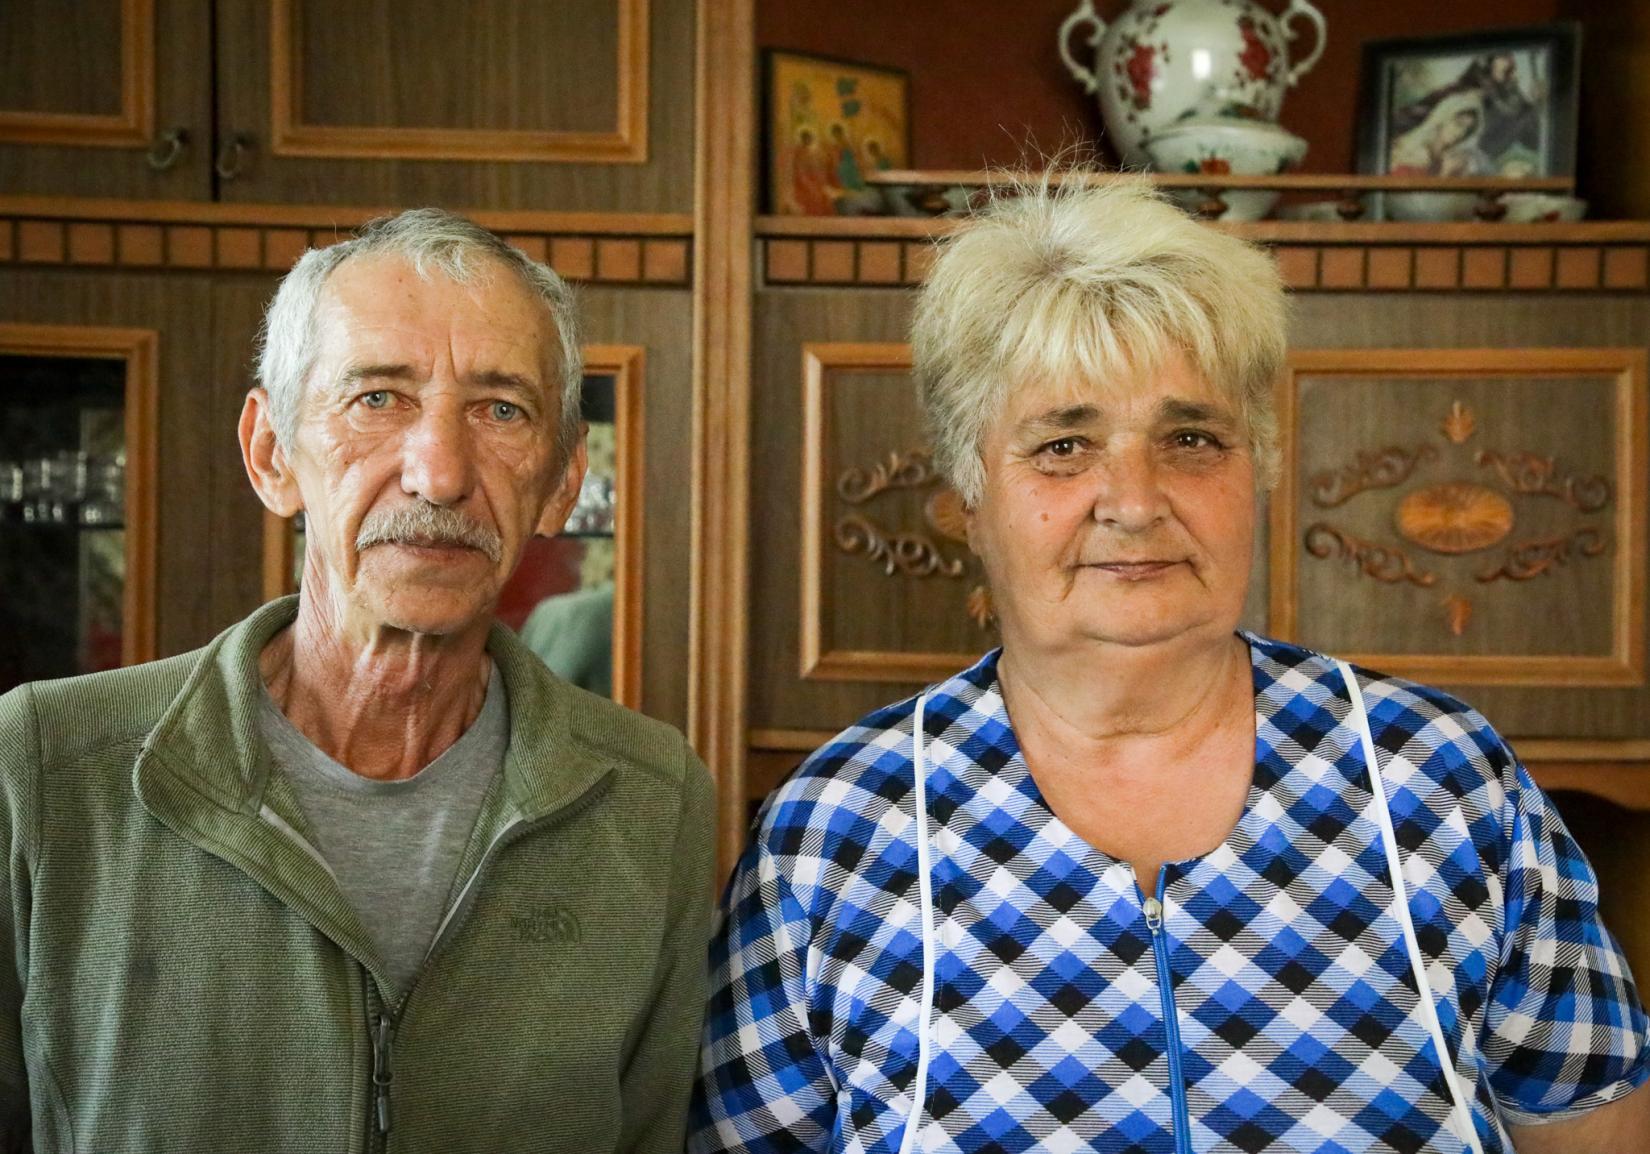 The portrait of pensioners